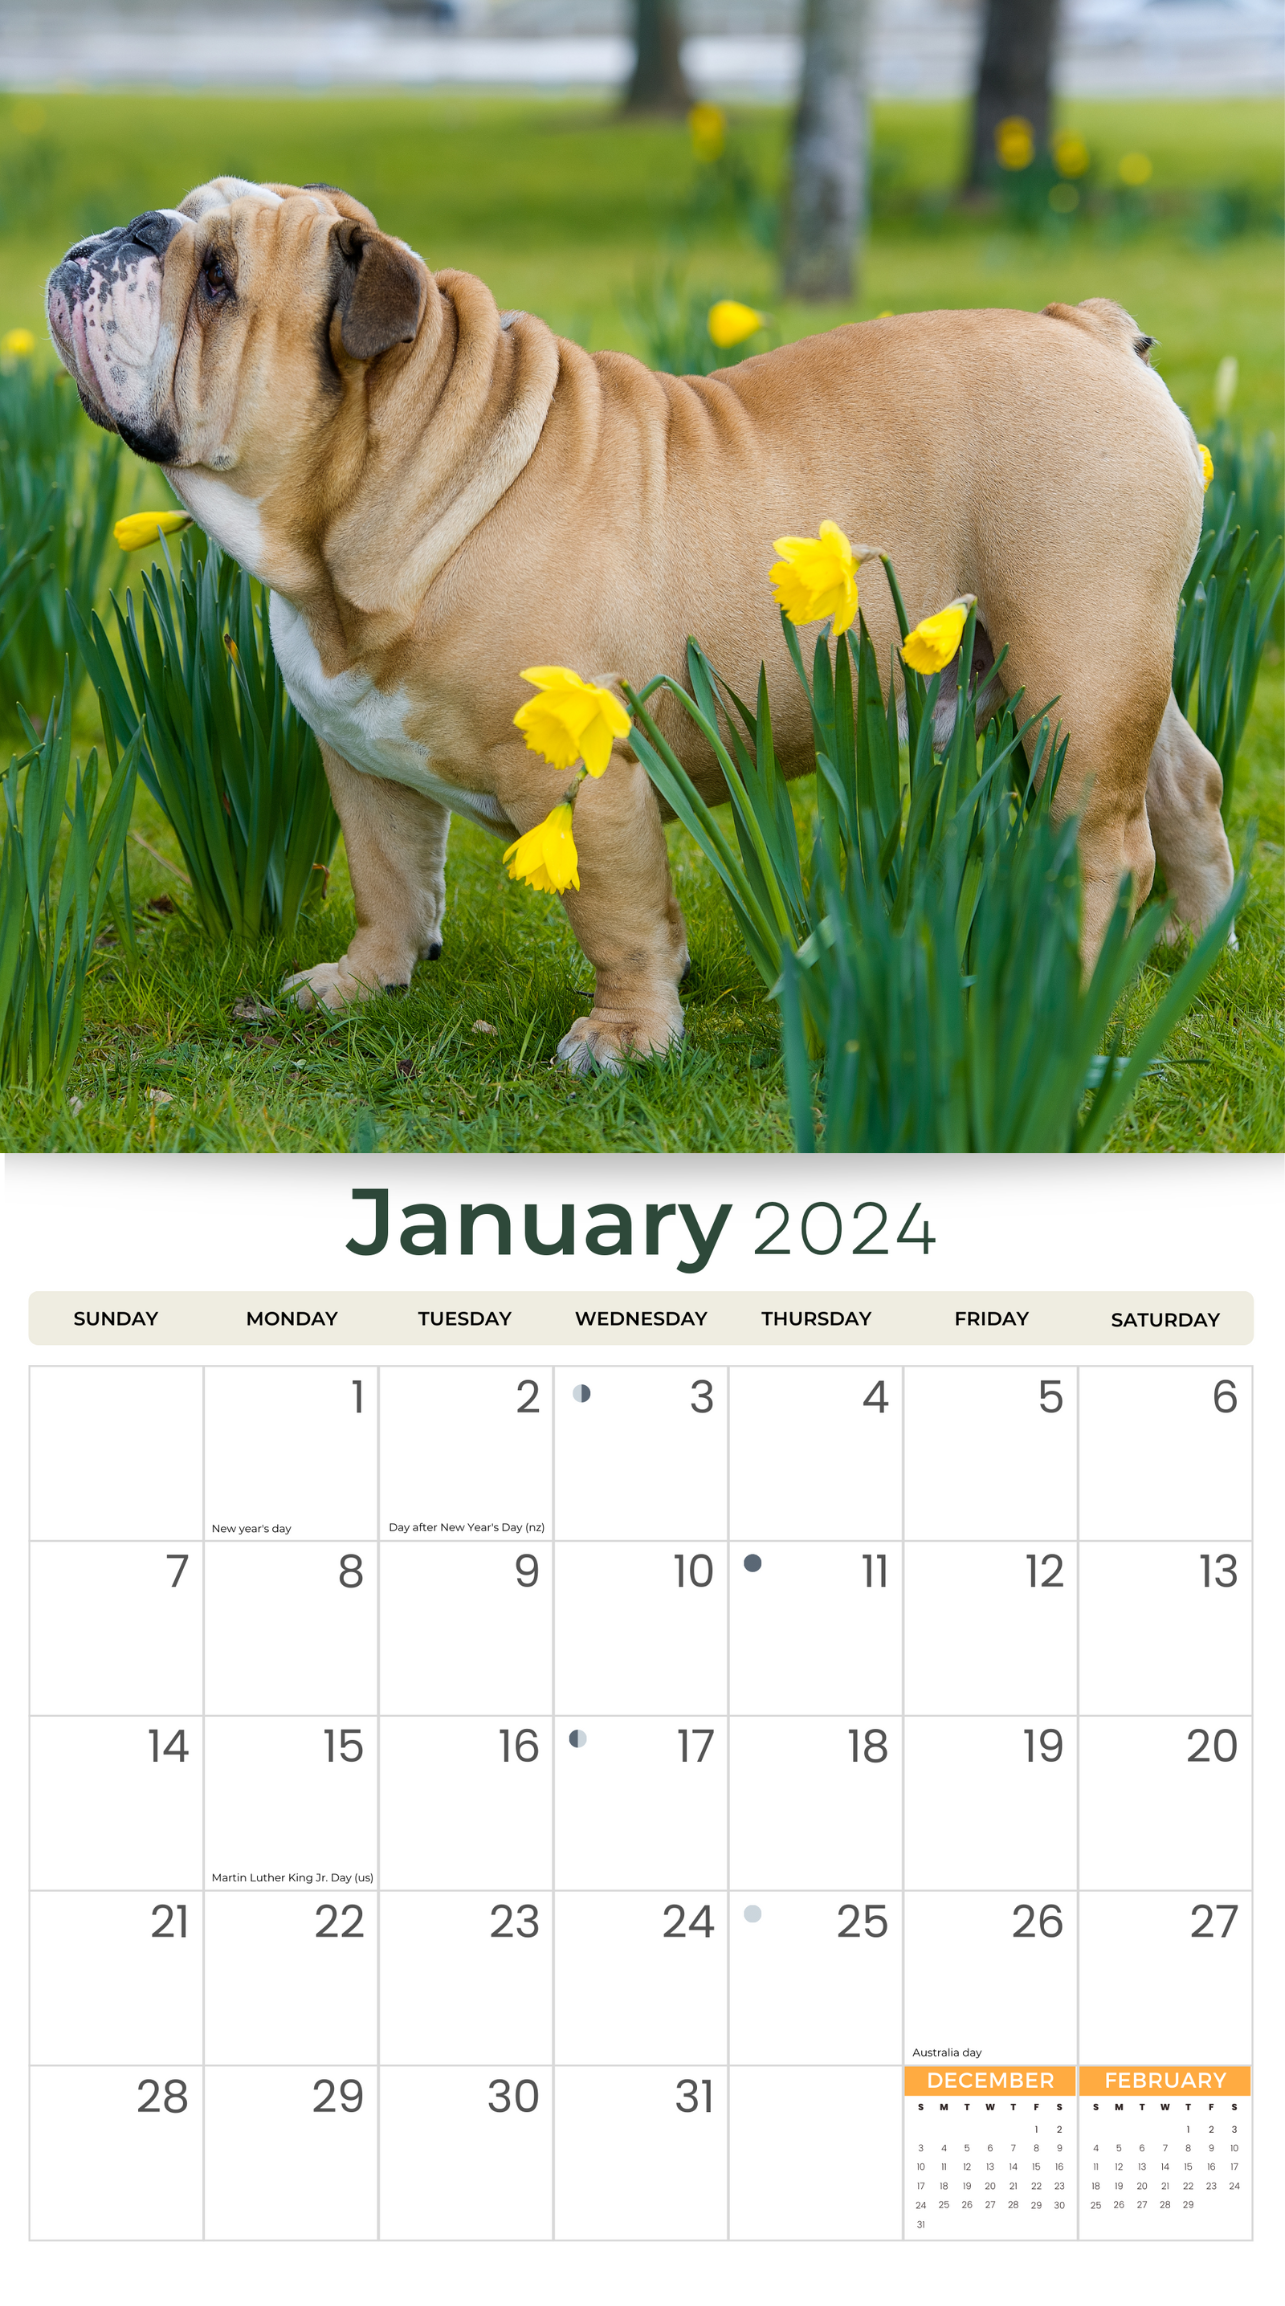 2024 English Bulldogs Dogs & Puppies - Deluxe Wall Calendar by Just Calendars - 16 Month - Plastic Free